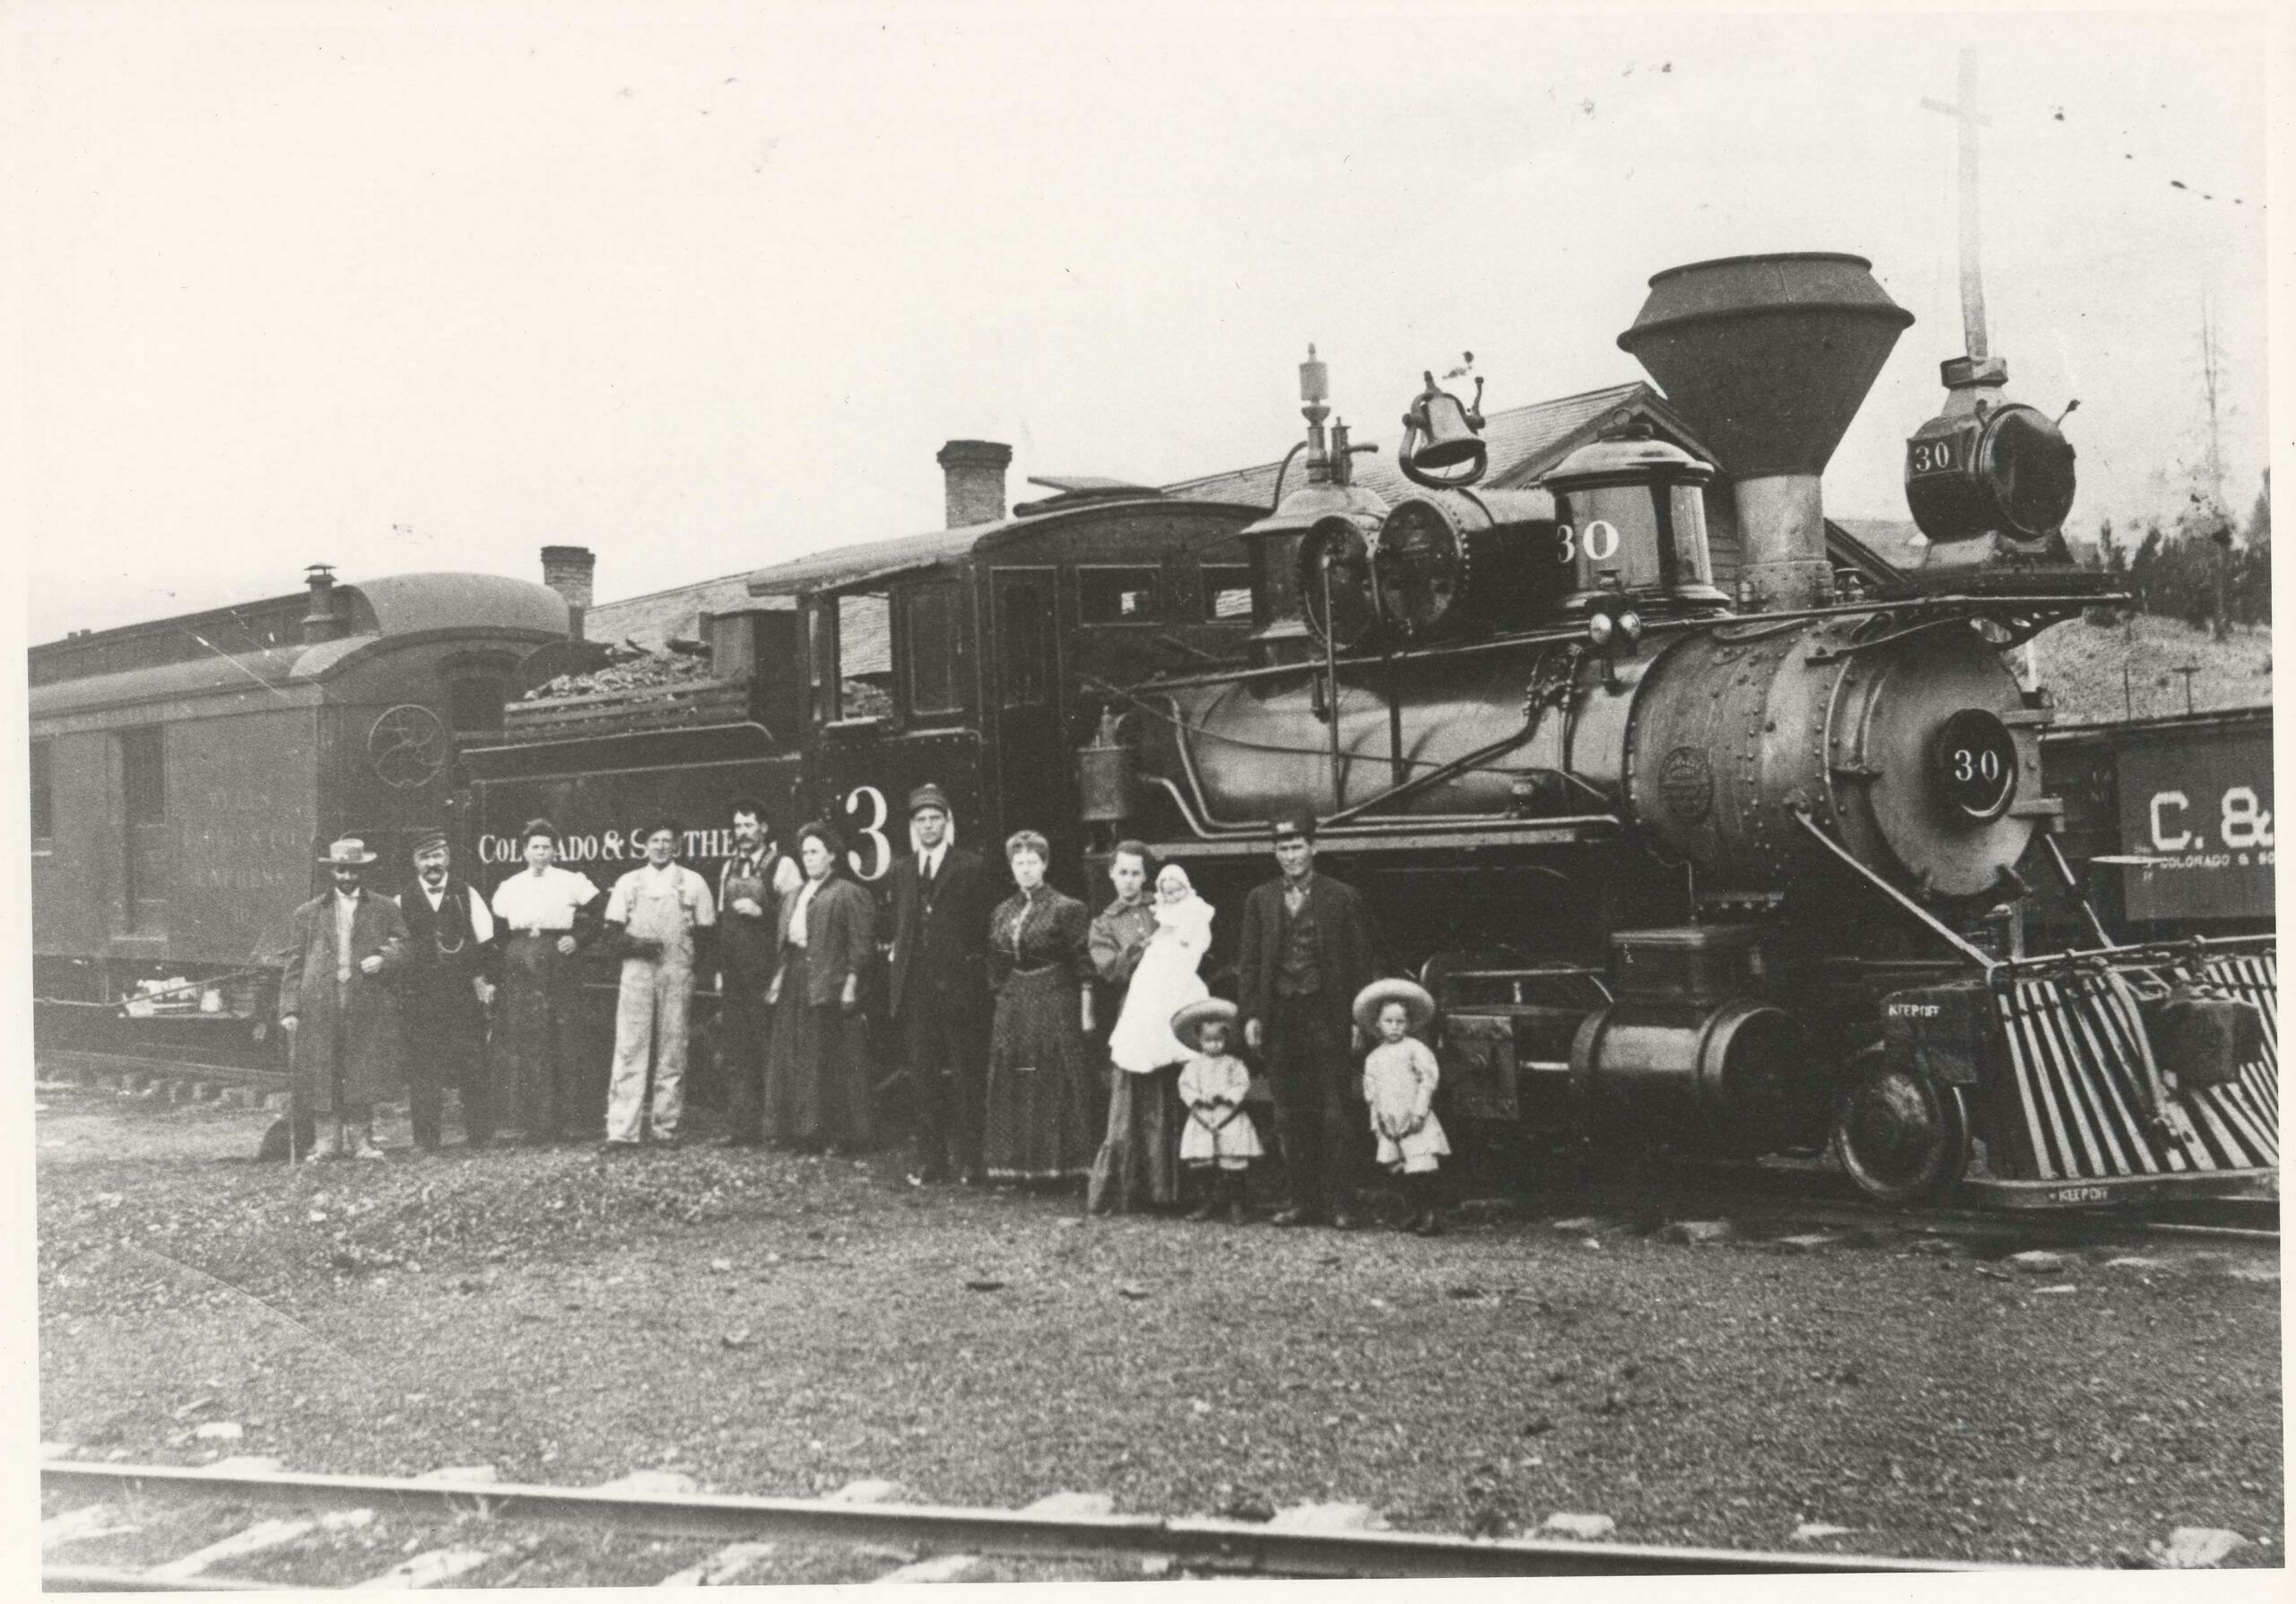 Colorado and Southern trains served Nathrop and the Western Slope via the Alpine Tunnel after the demise of the storied Denver, South Park and Pacific about 1899. The C & S struggled financially as did its predecessor, finally abandoning the run to Gunnison in 1910 with closure of the Tunnel. The line from Buena Vista to Hancock was abandoned in 1924.  (1) Maud Perschbacher dates this picture as taken in July or August, 1910 at the Alma Station. She identified the people from left to right as: a blind man named Redman, depot agent John Geyer and his wife, fireman Bill Cantonwine, engineer Bill Gallagher and his wife, conductor Jack Harris and his wife, Maud (Matthews) Pershcbacher holding her son, William Earnest Perschbacher (aged 3 months), John Raymond Perschbacher (son of Joseph and Maud), brakeman Joseph T. Perschbacher and Leonard Perschbacher (son of Joseph and Maud).  (4)